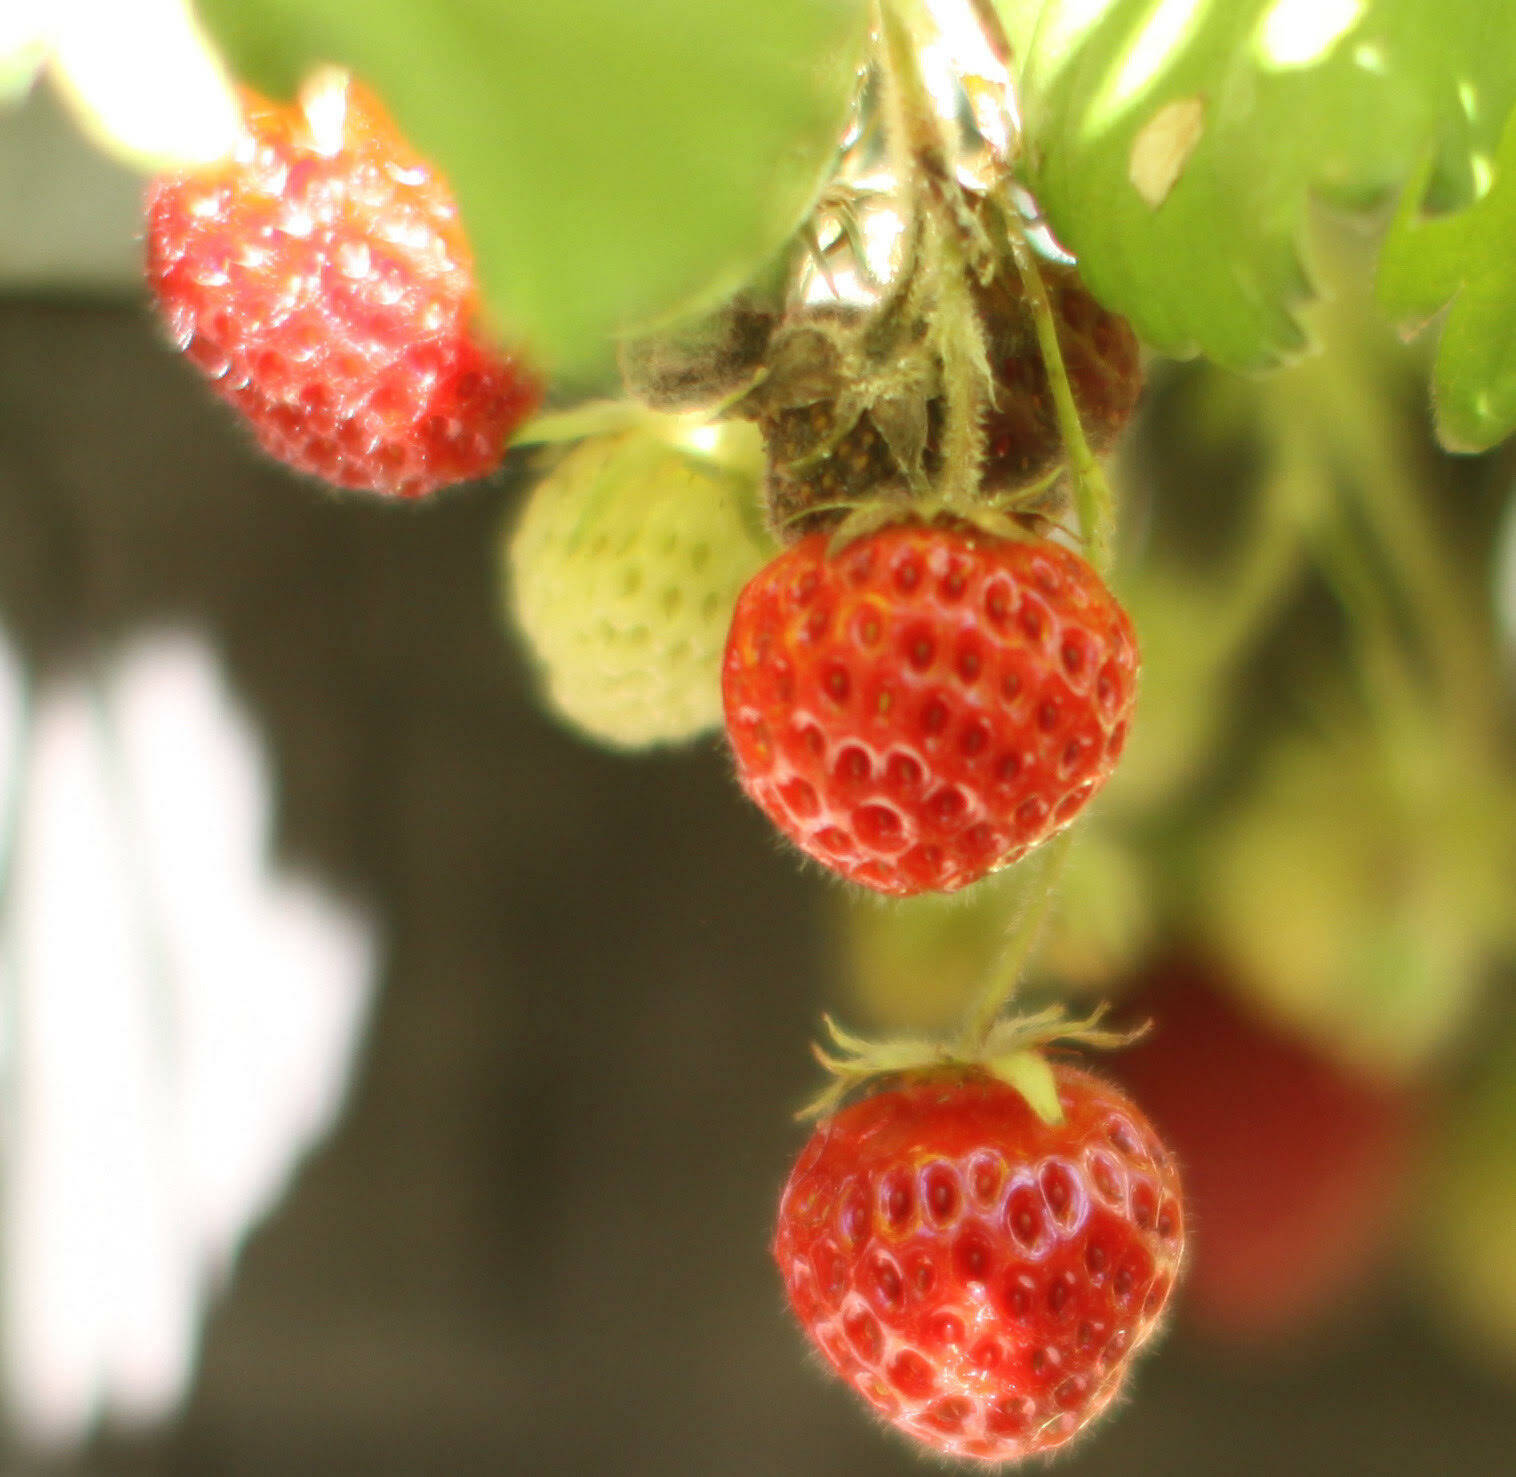 Photo BY SANDY CORTEZ
After a planting year, June-bearing strawberries produce well for about three to five years.